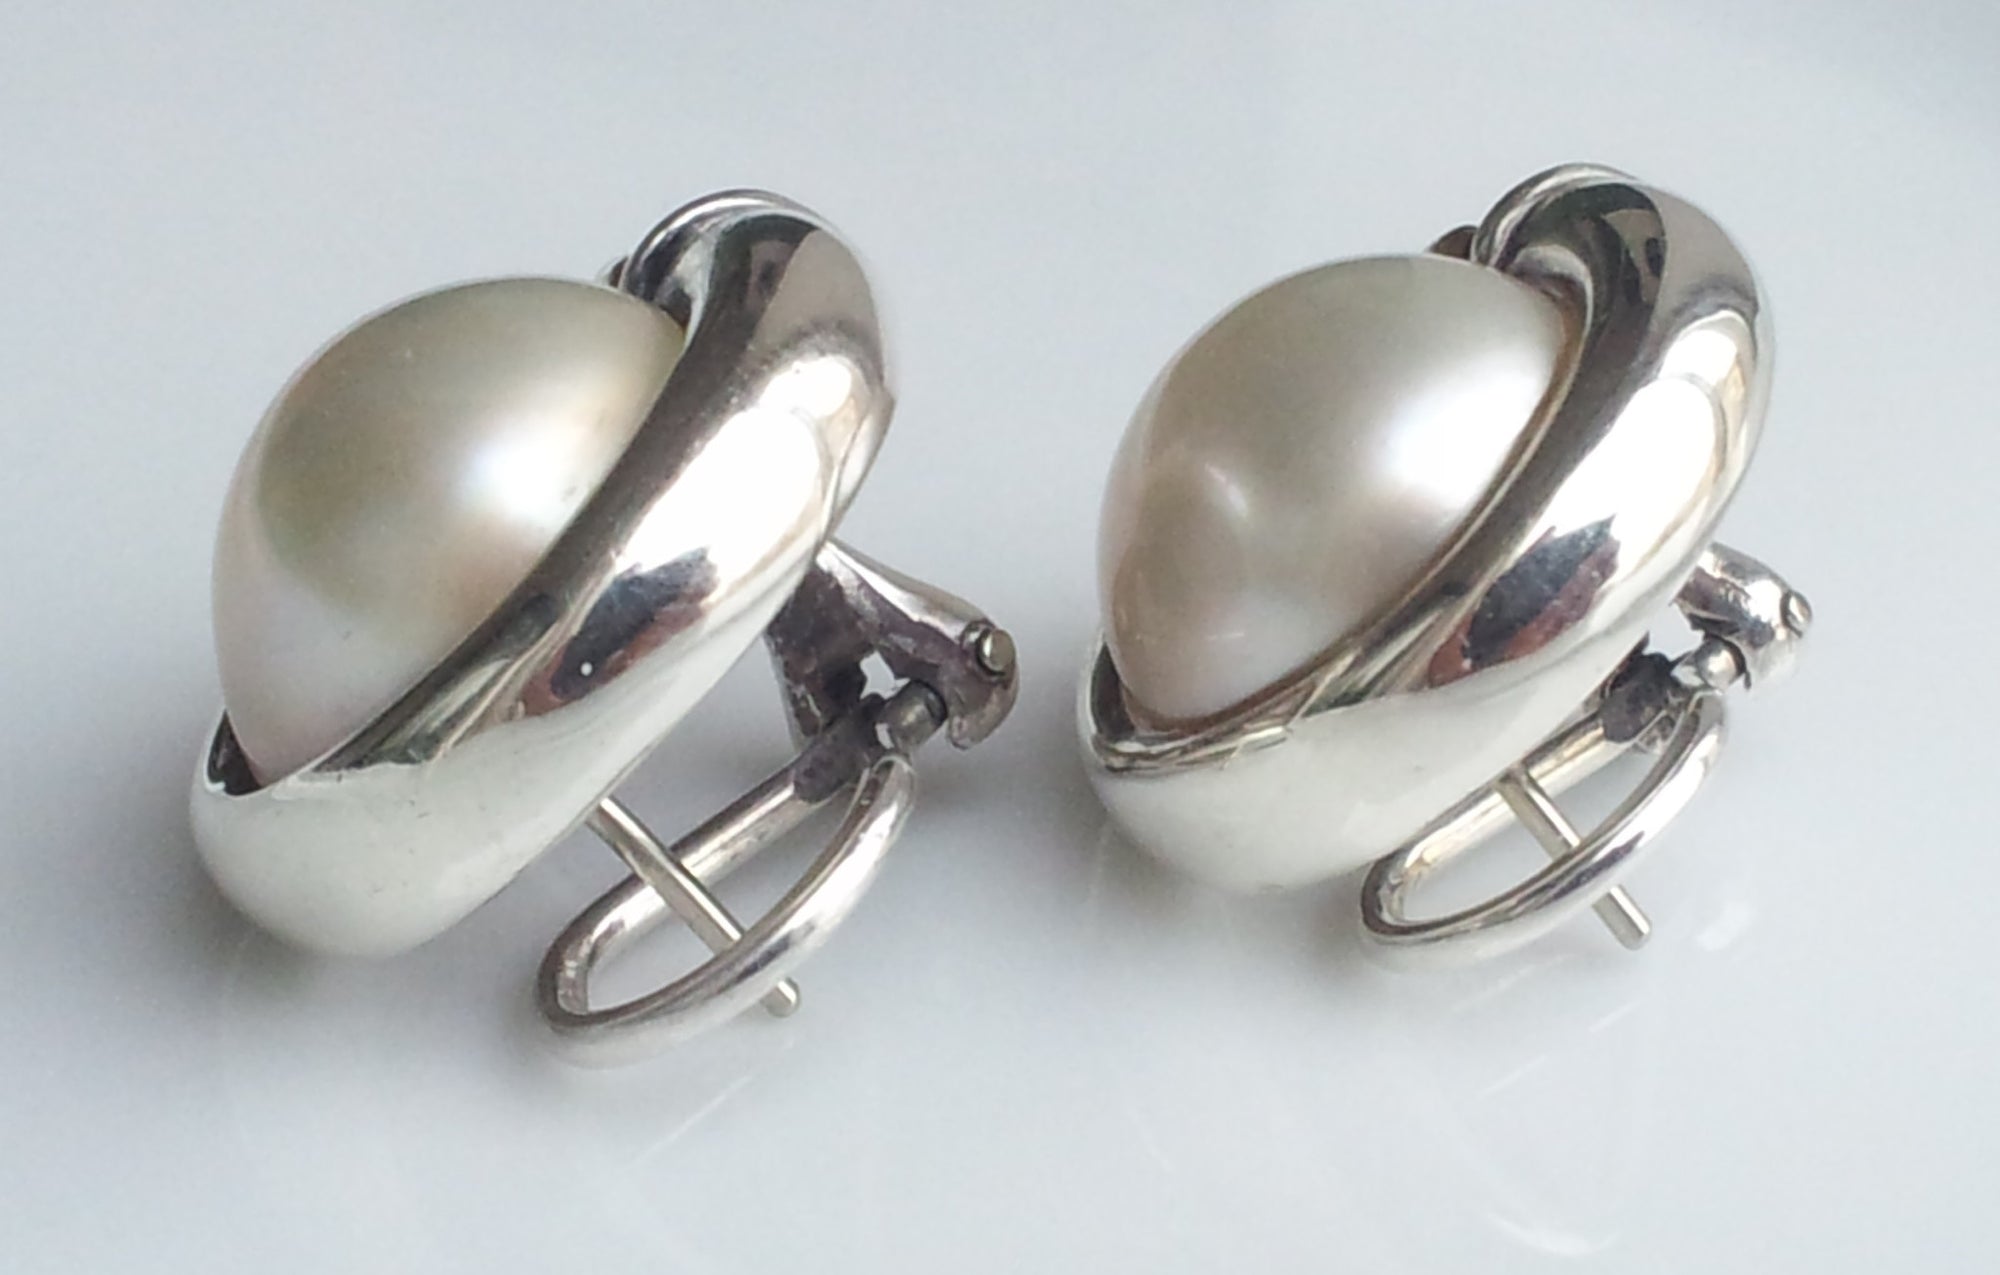 Tiffany & Co. Vintage Sterling Silver & 18K Yellow Gold Mabe Pearl Earrings with French Backs